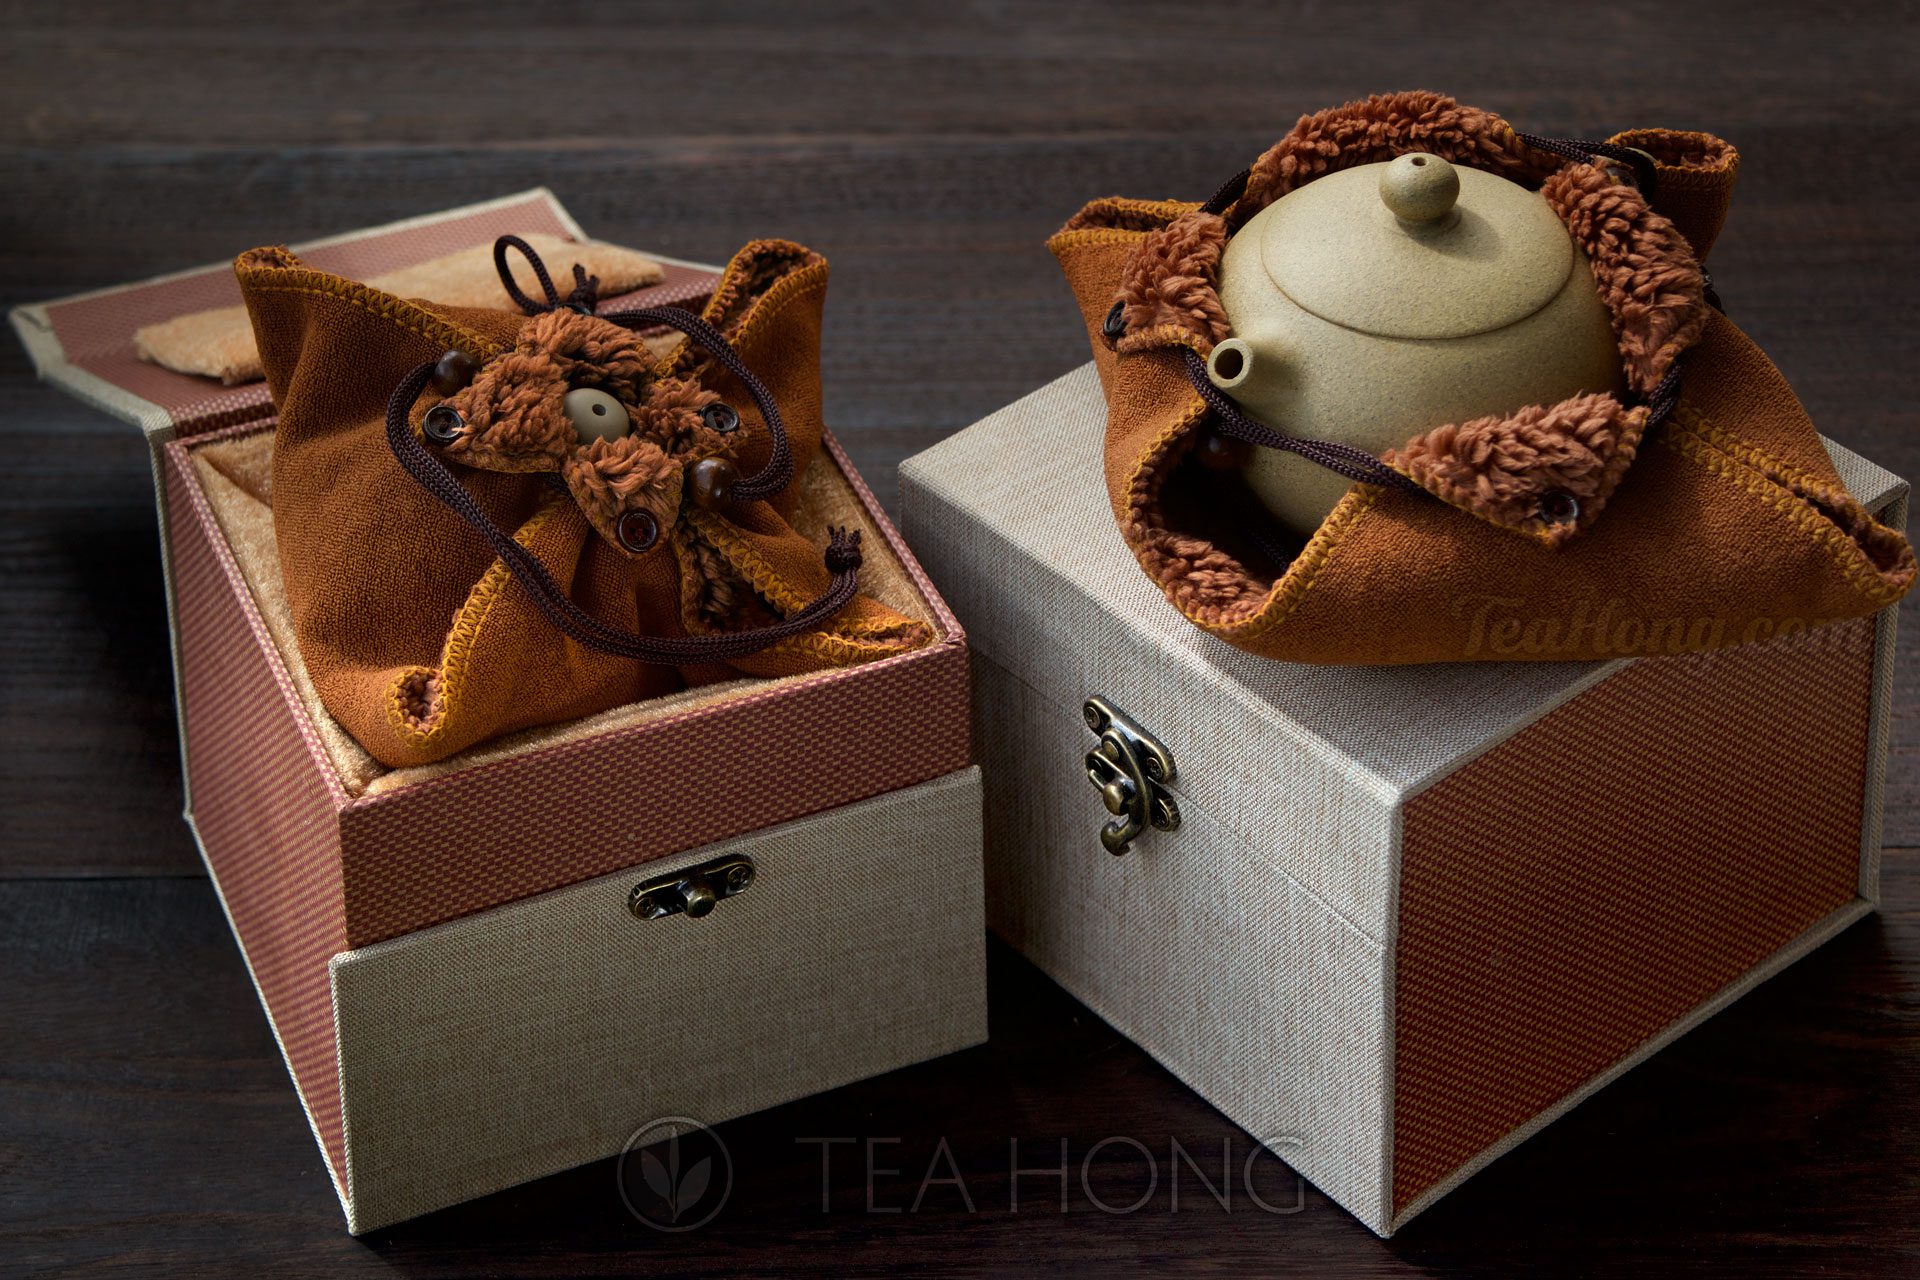 Collector box for Yea Hong's Yixing Teapots